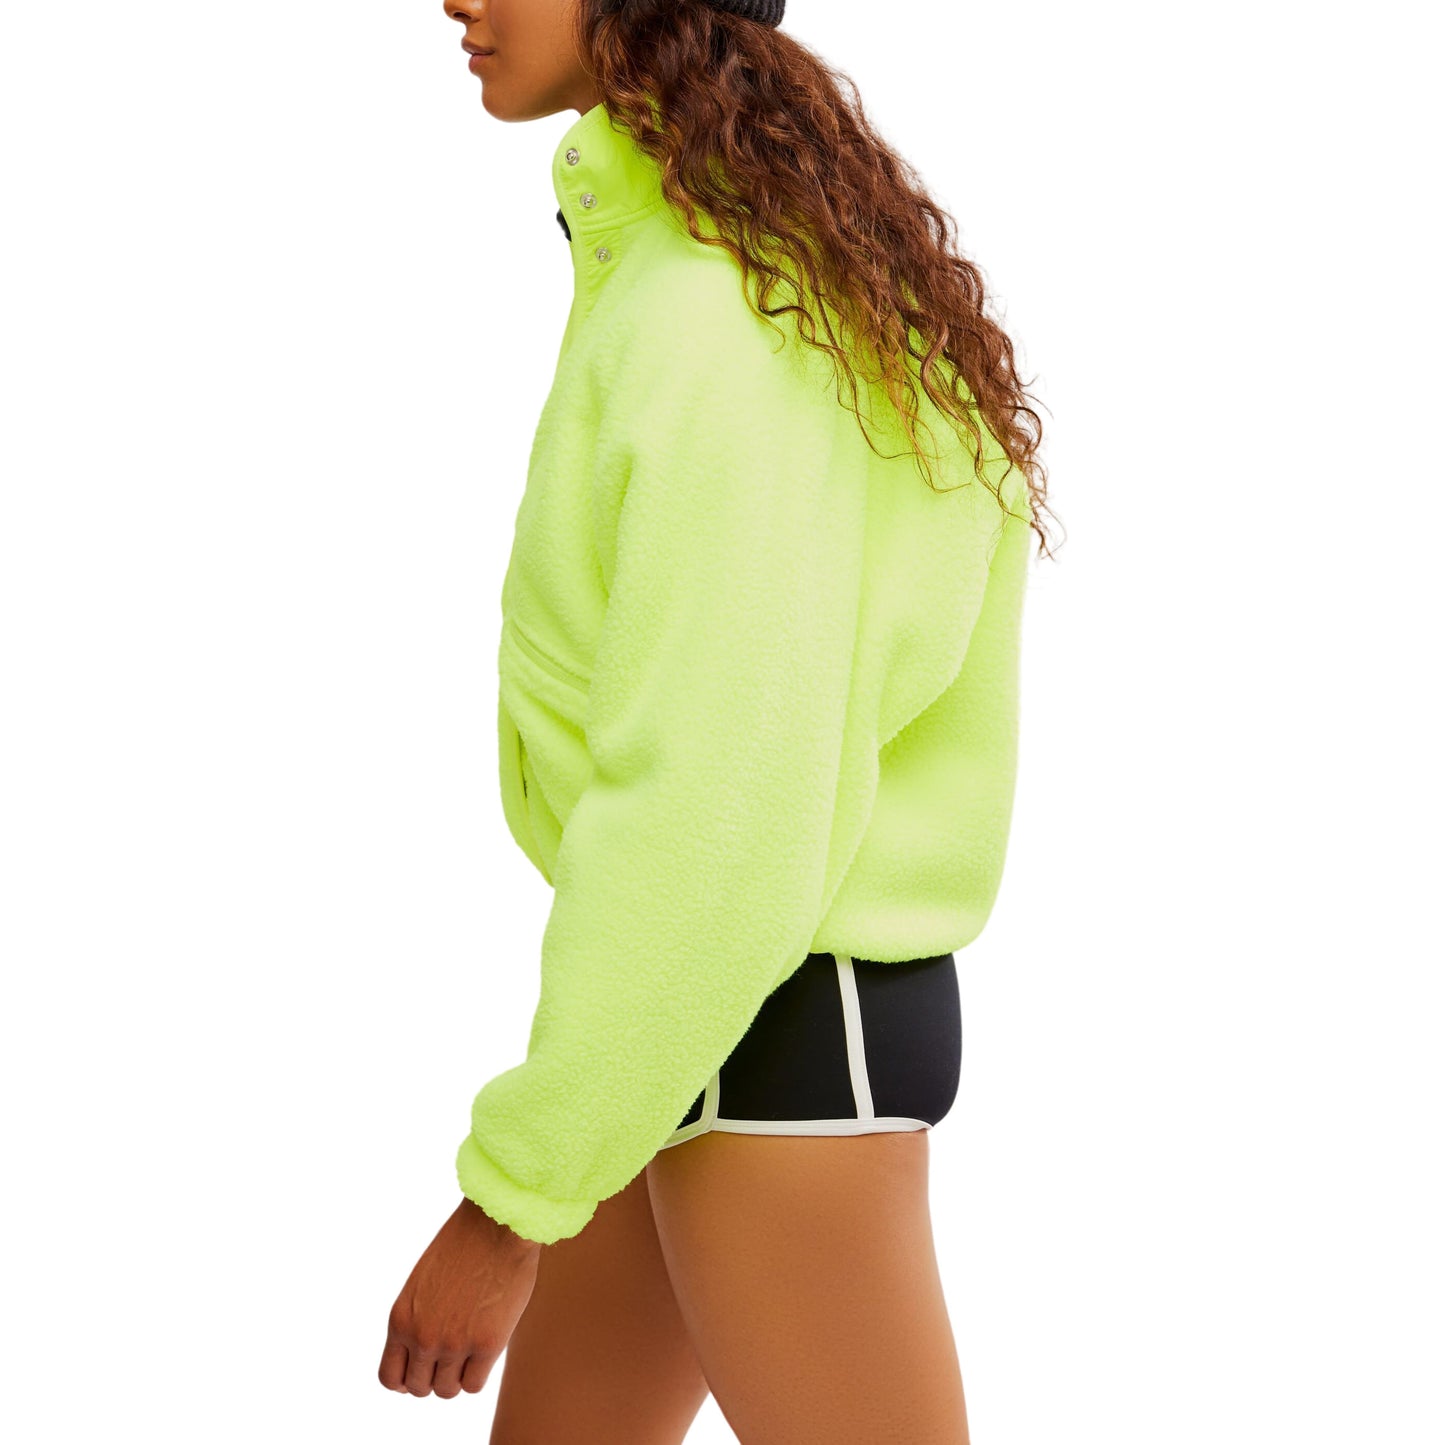 Side profile of a woman wearing a Free People Movement Hit The Slopes Jacket in Highlighter green with zippered pockets and black shorts, walking against a white background.